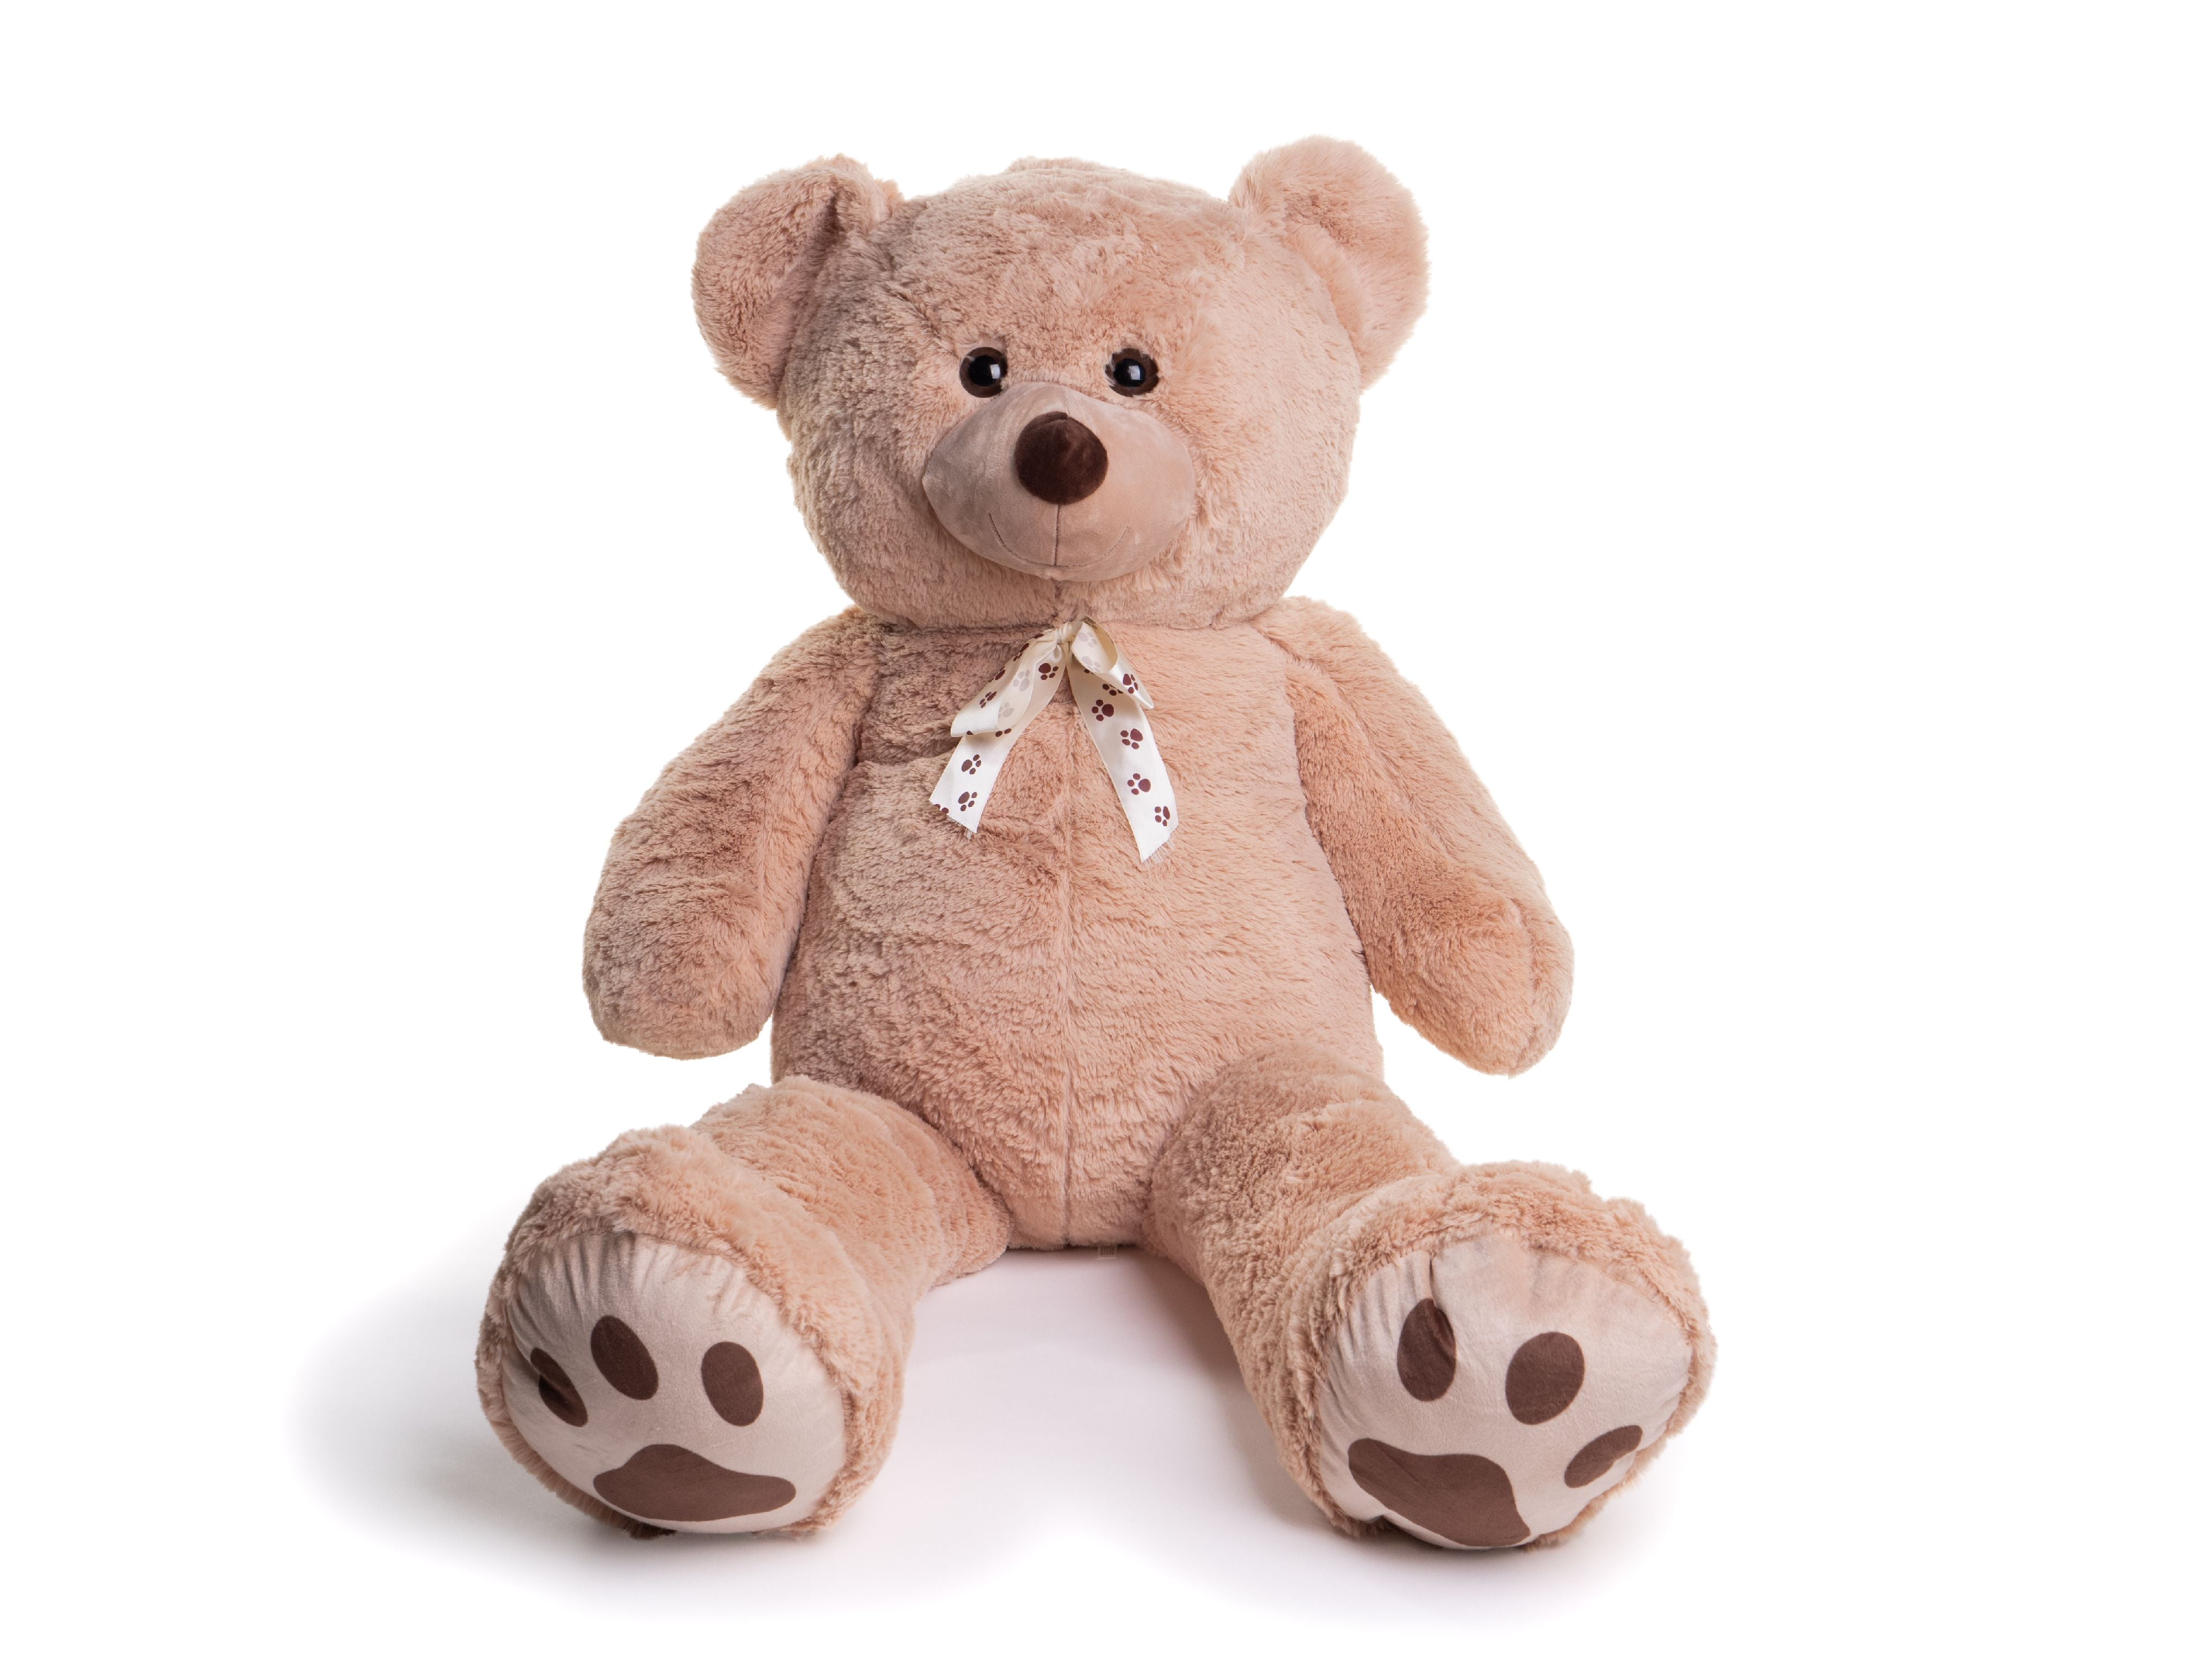 32in.Teddy Bear Plush Giant Huge Big Light Brown Soft Bears Toys Doll ONLY COVER 